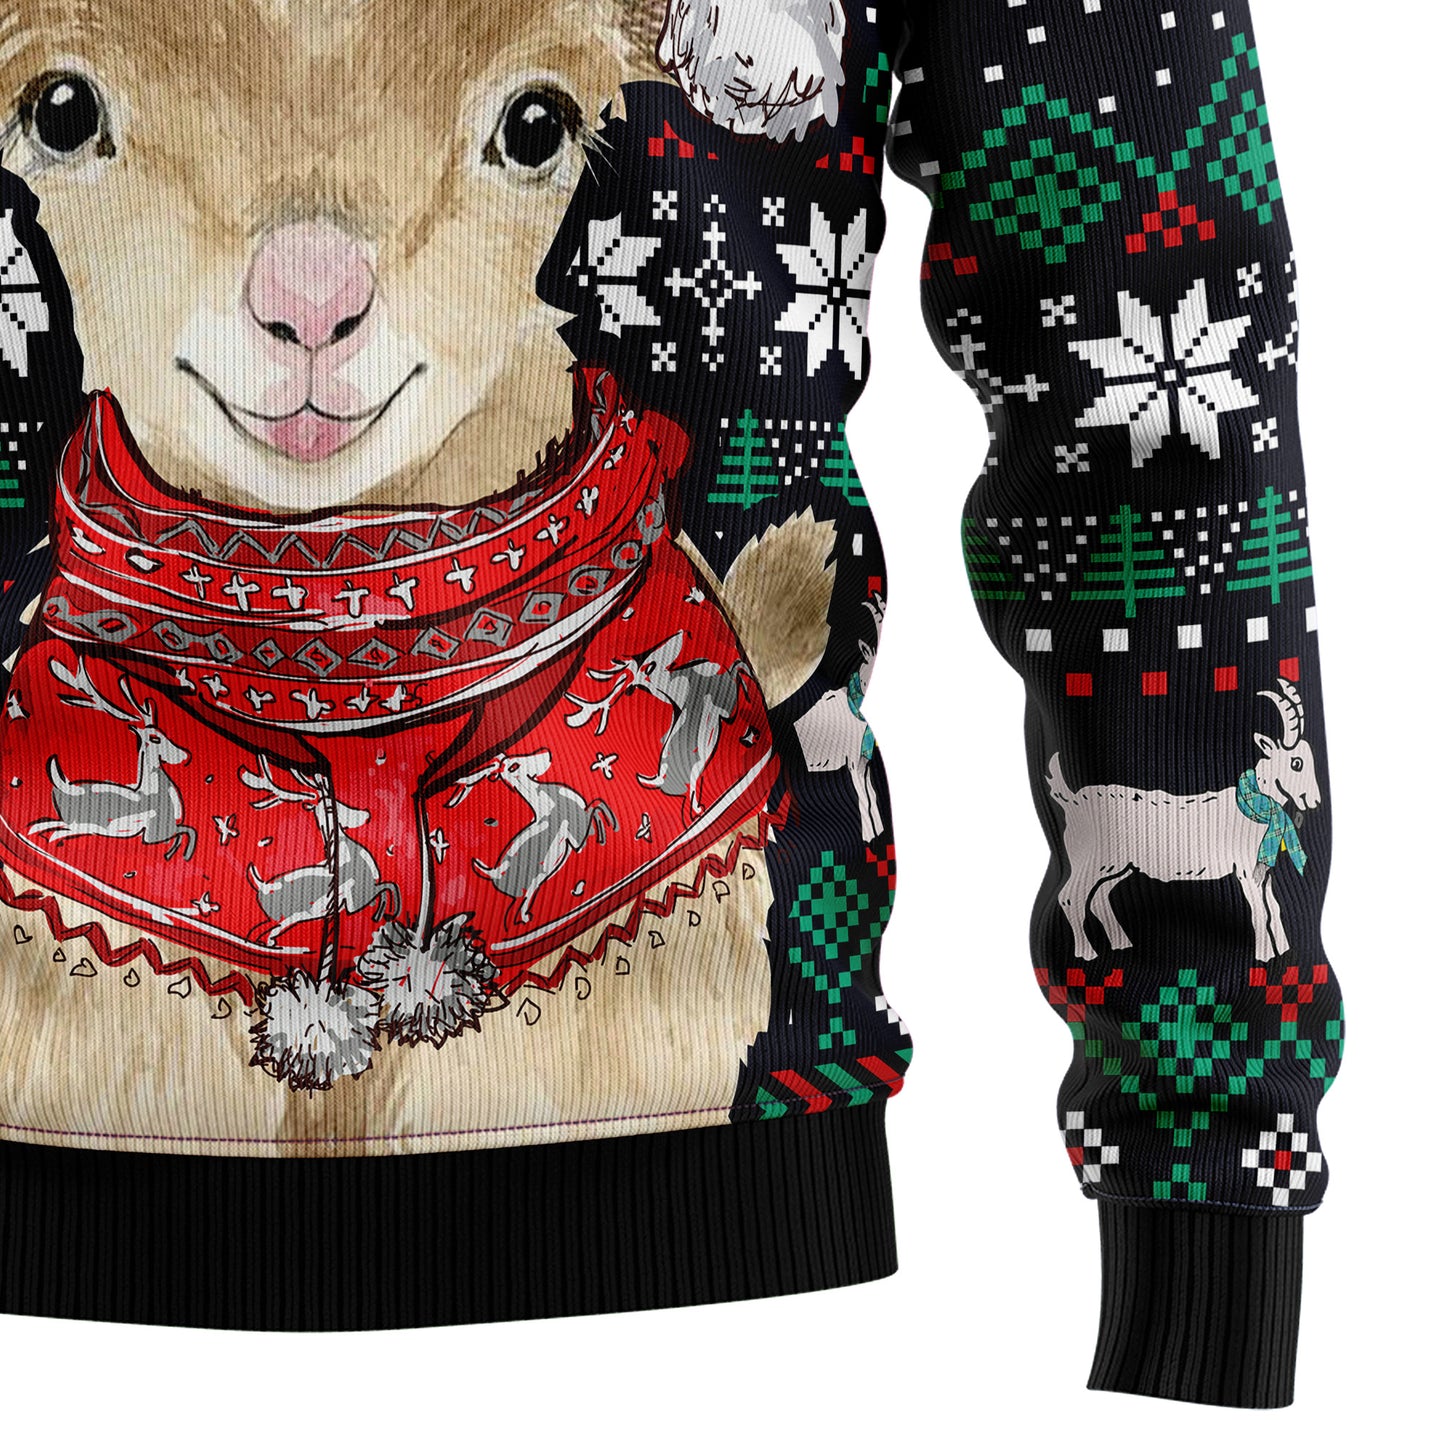 Cute Goat T1410 Ugly Christmas Sweater